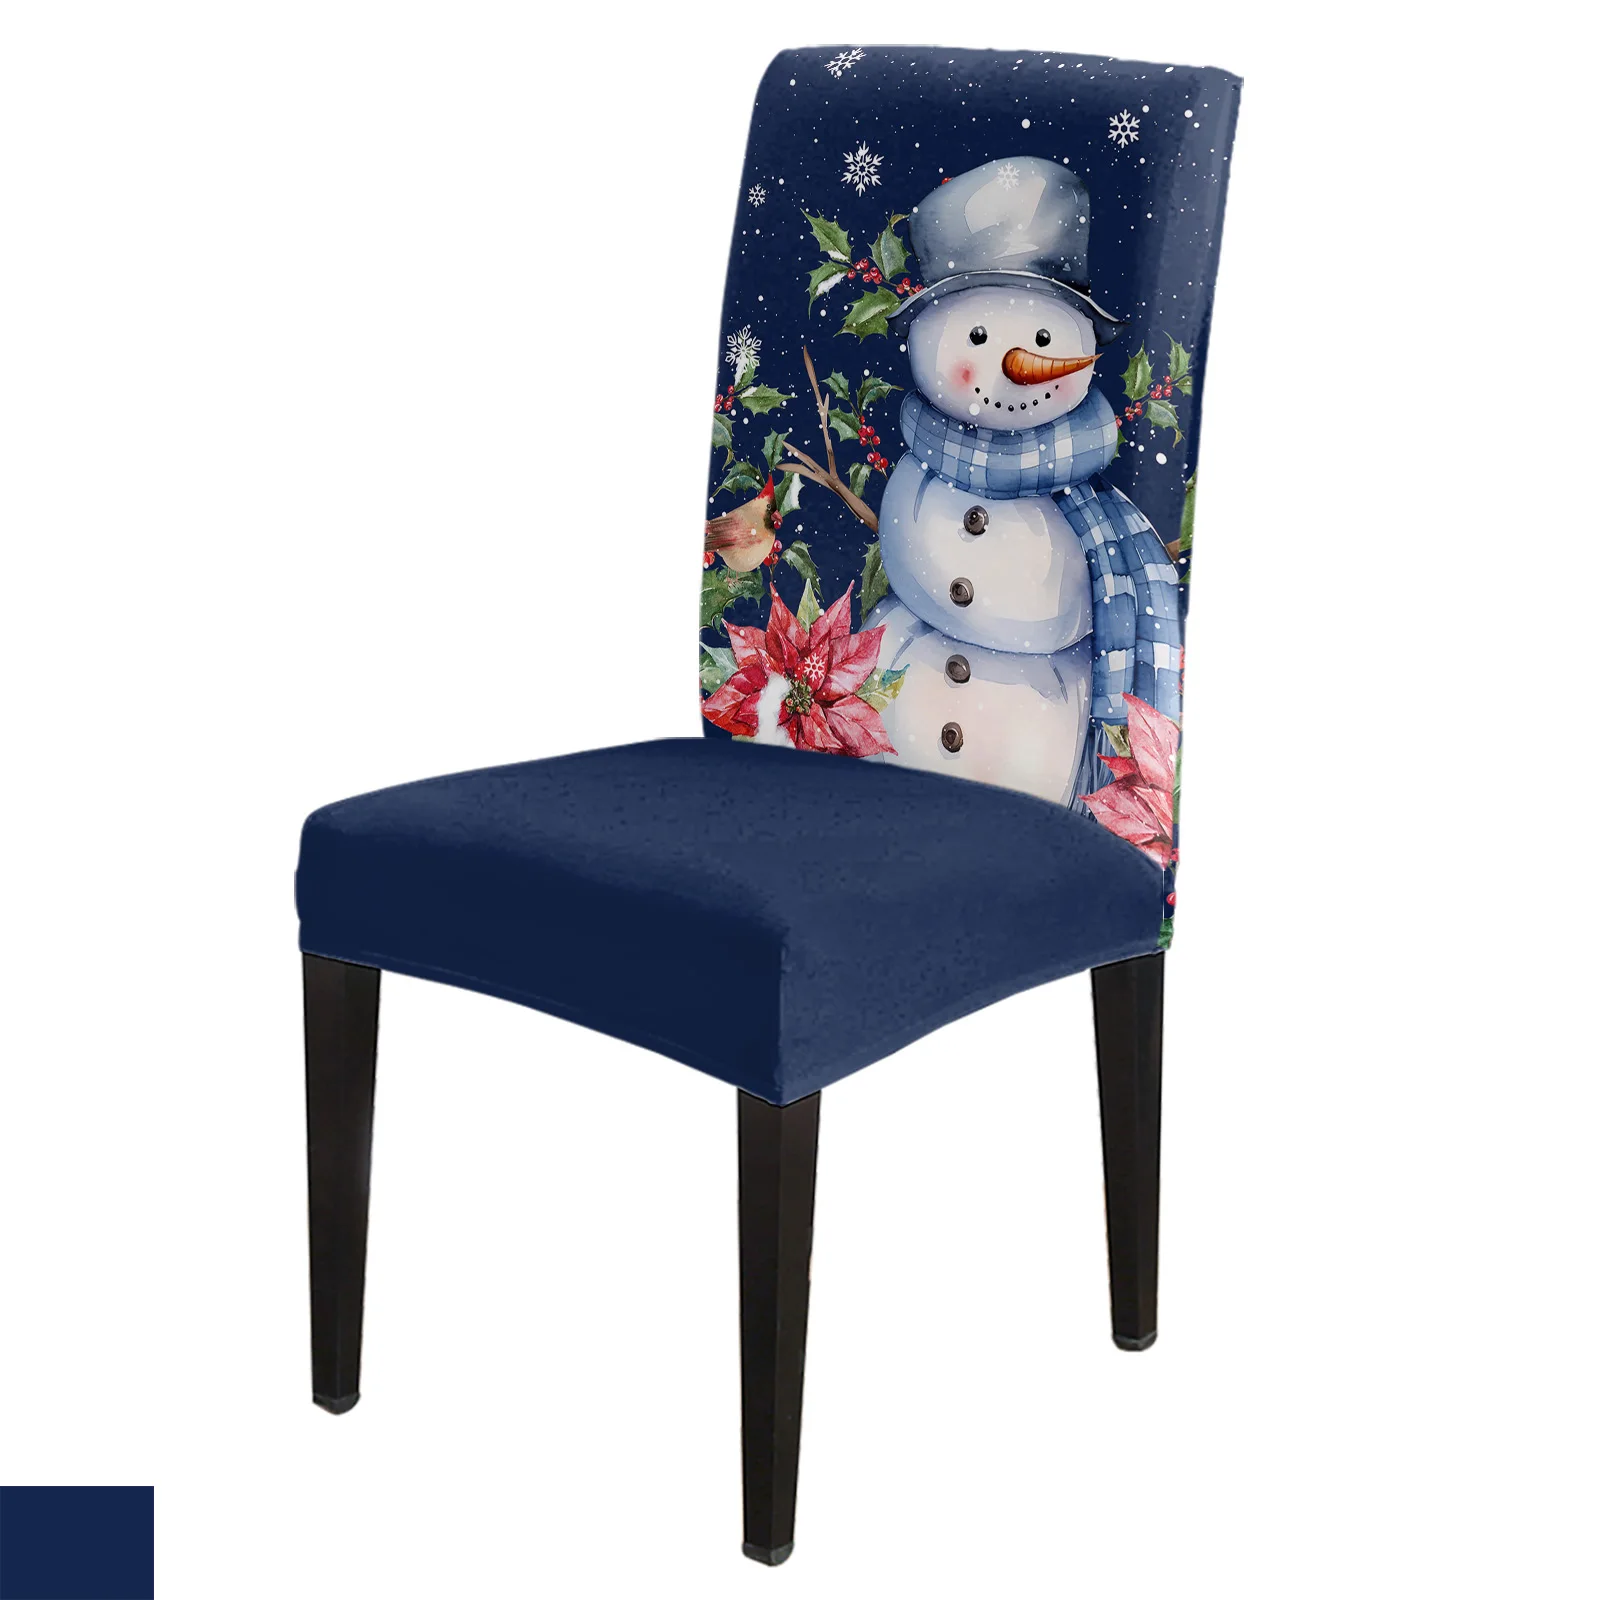 

Christmas Poinsettia Snowflake Snowman Chair Cover Set Kitchen Stretch Spandex Seat Slipcover Home Decor Dining Room Seat Cover